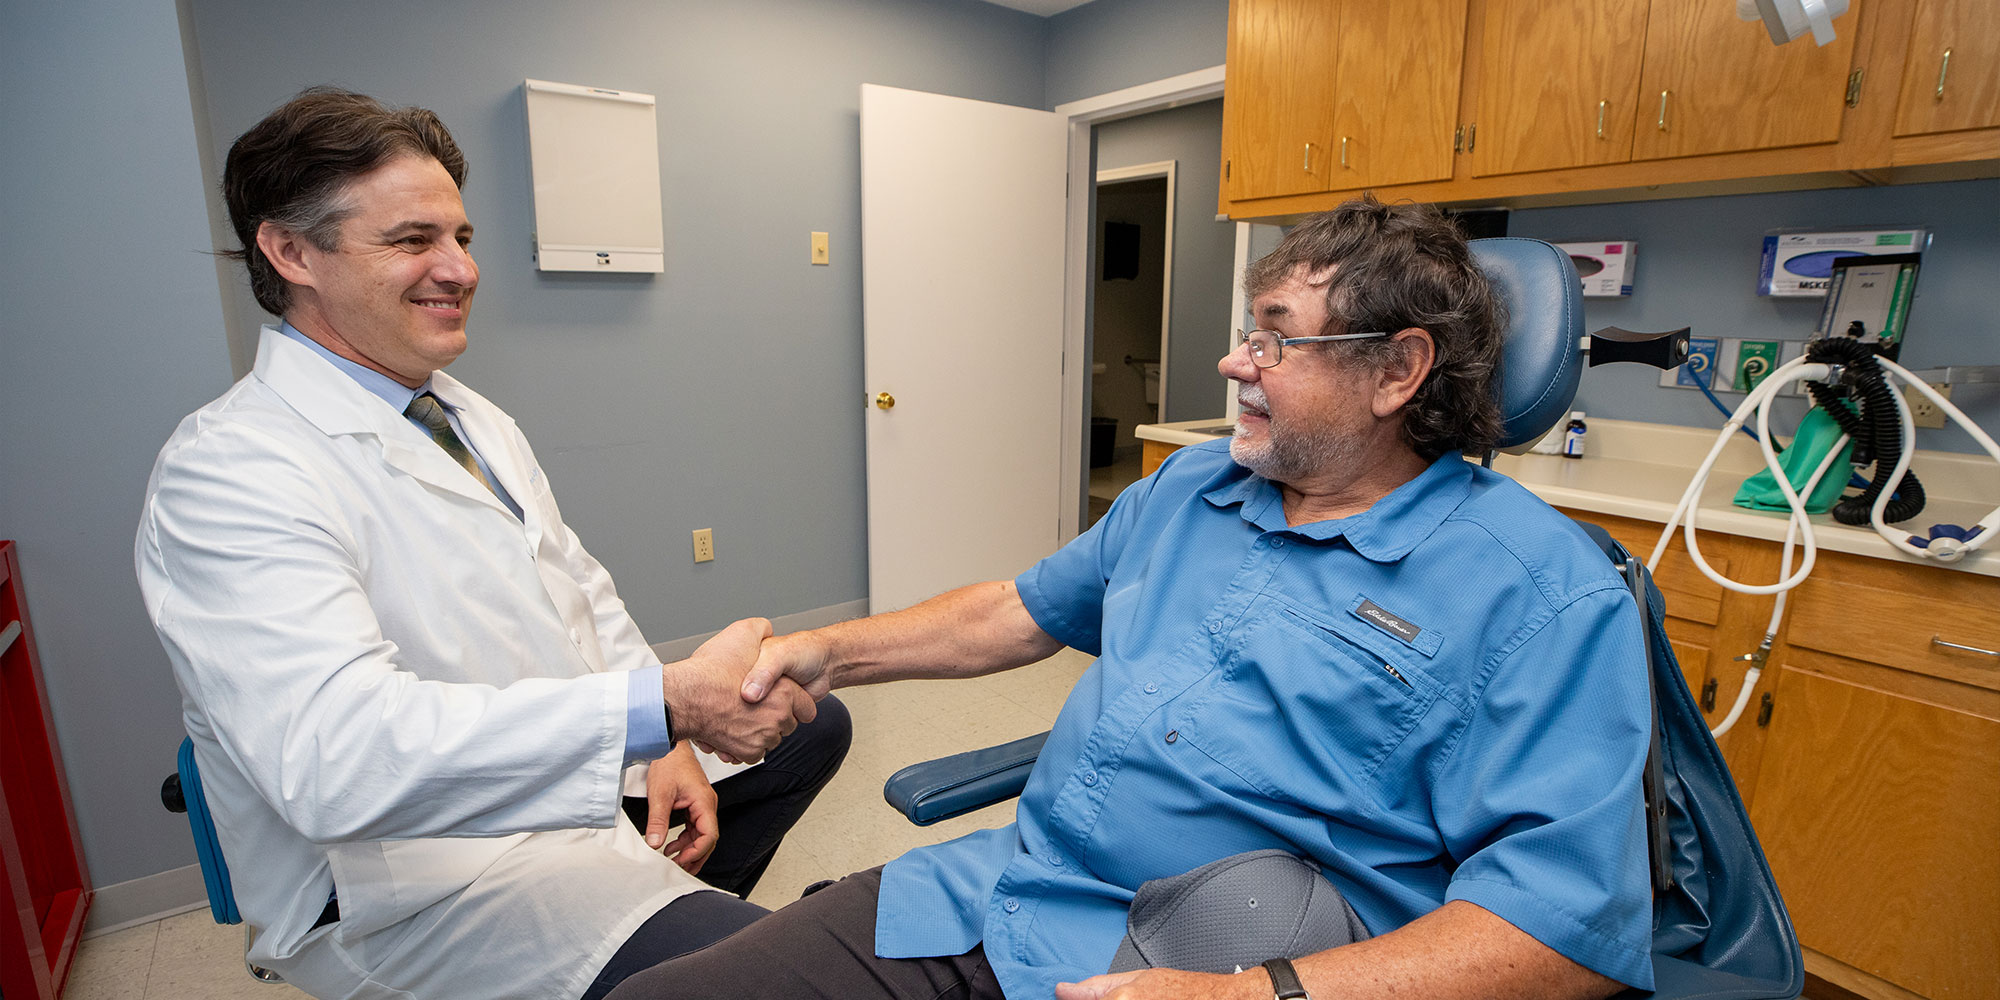 patient shaking hands with doctor within the dental practice